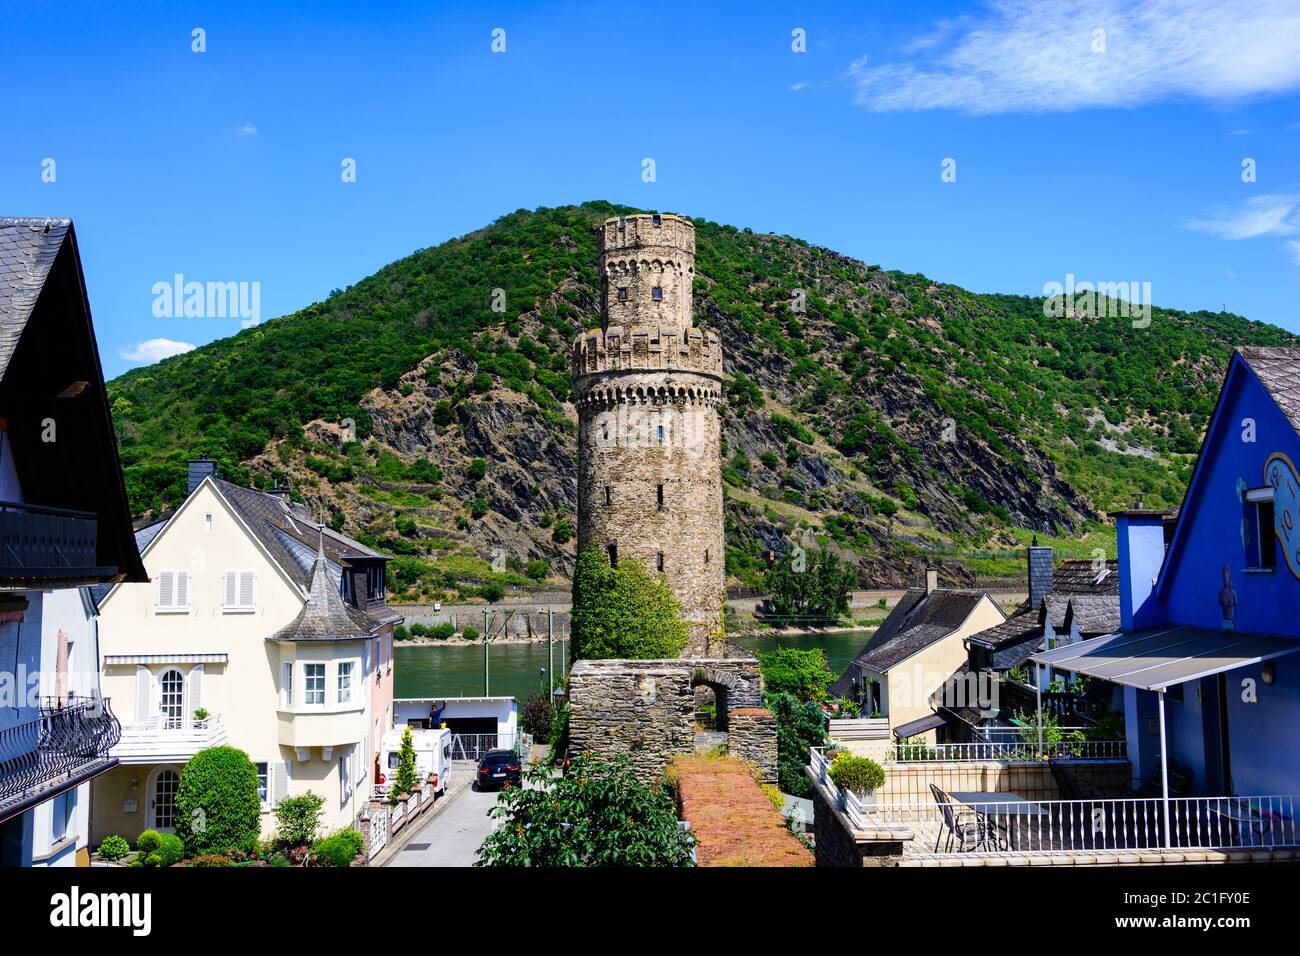 Defense Towers Of The Medieval Town Of Oberwesel In Rhine Valley, Germany  Stock Photo, Picture and Royalty Free Image. Image 85474711.